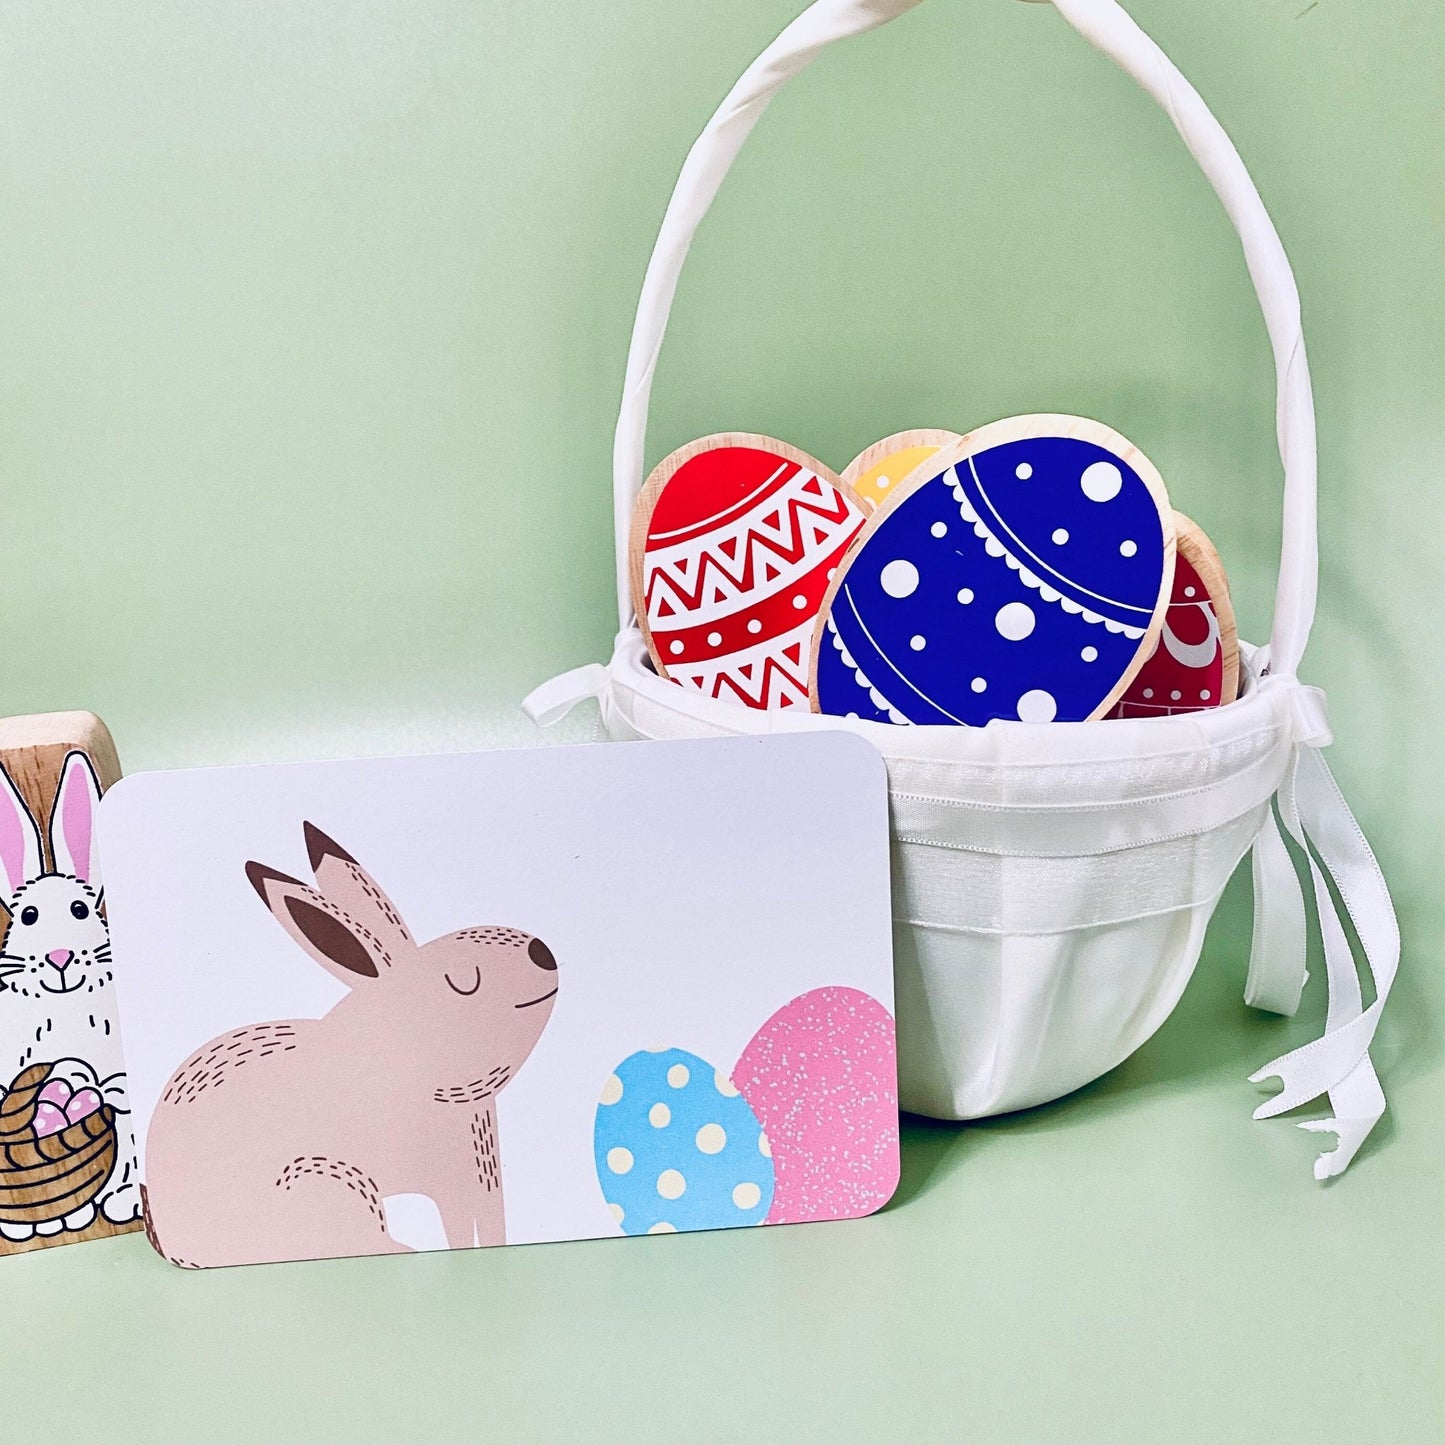 Easter egg hunt postcards - Dolly and Fred Designs